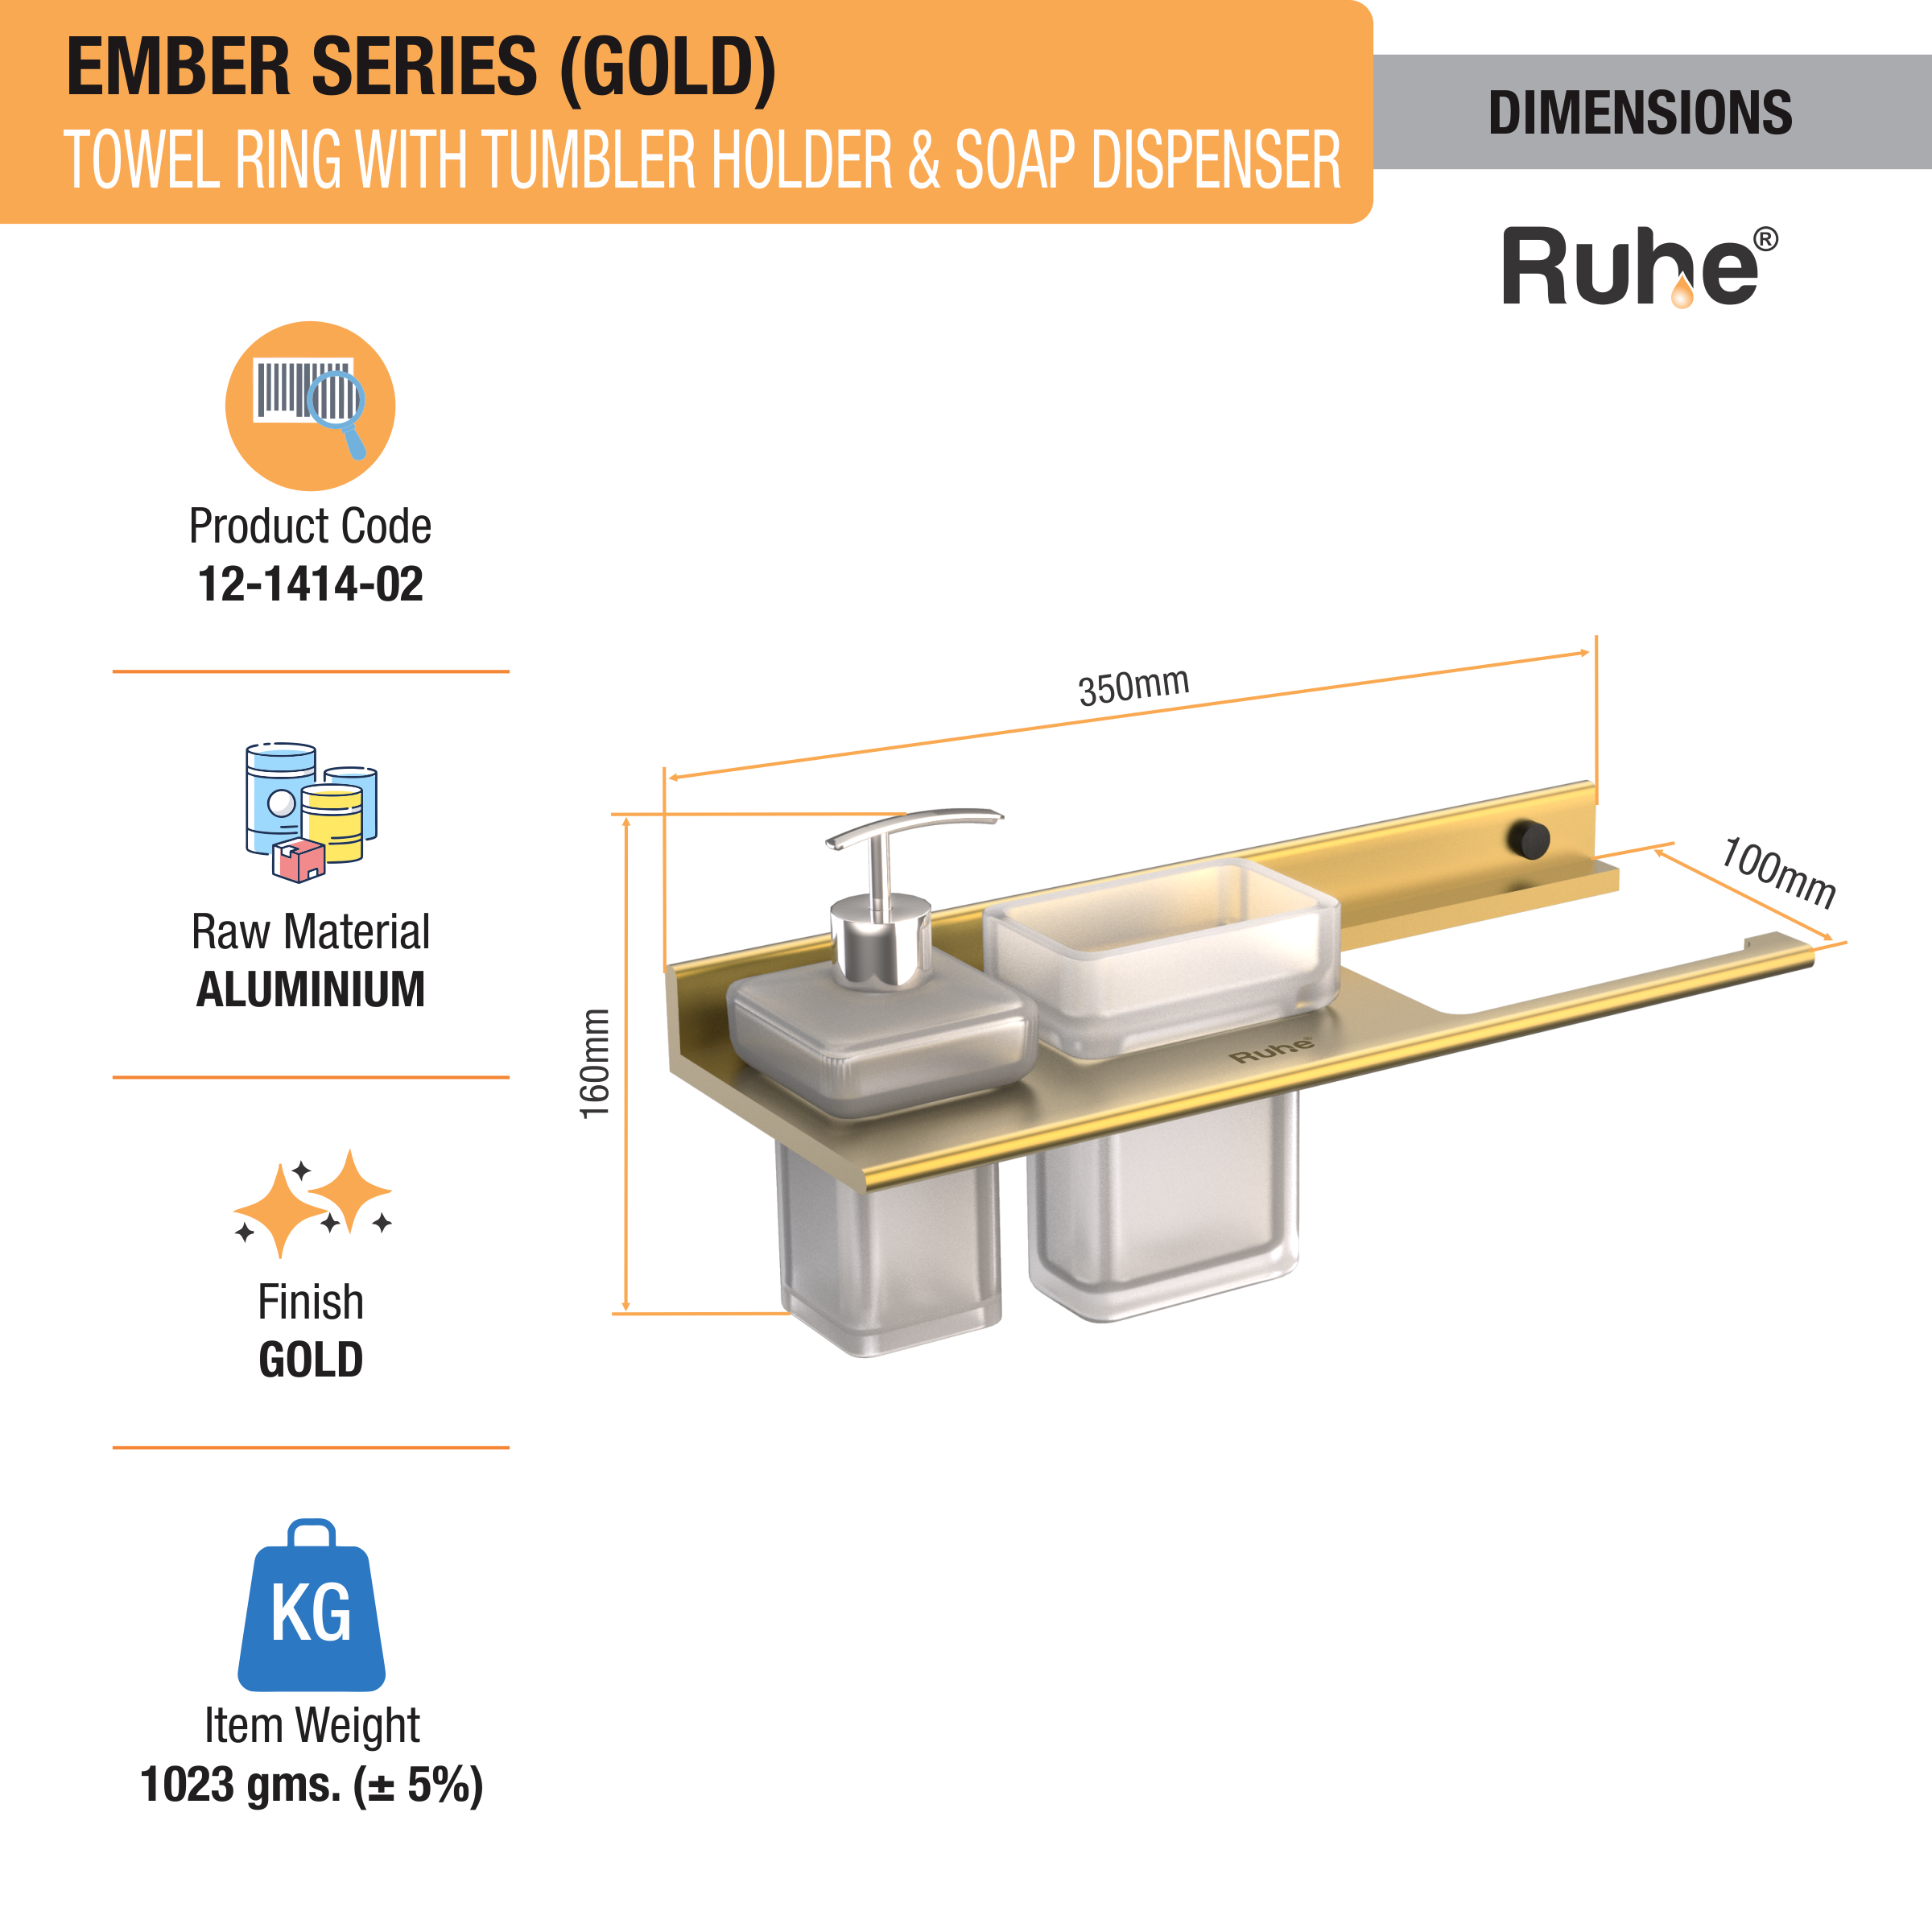 Ember Gold Towel Ring with Tumbler Holder & Soap Dispenser (Space Aluminium) dimensions and sizes